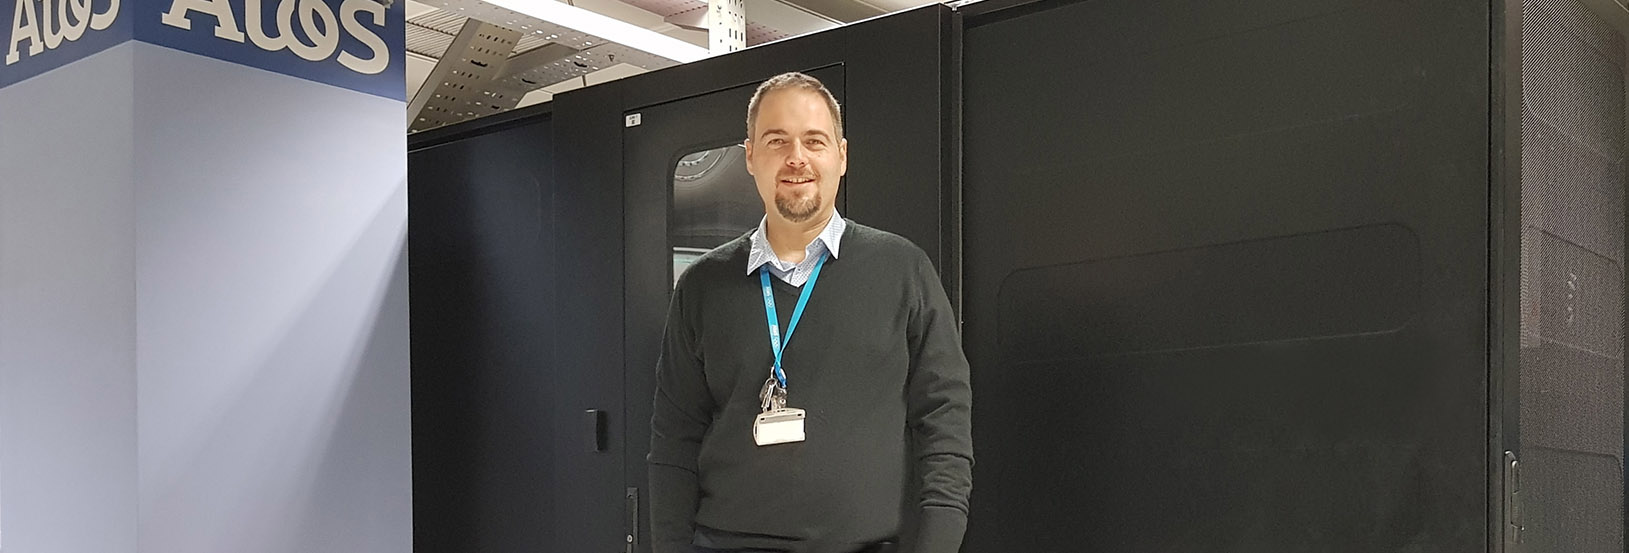 The 3 most important trends in the datacentre world right now, according to Gabriel Ventin, Data Centre Manager at Atos